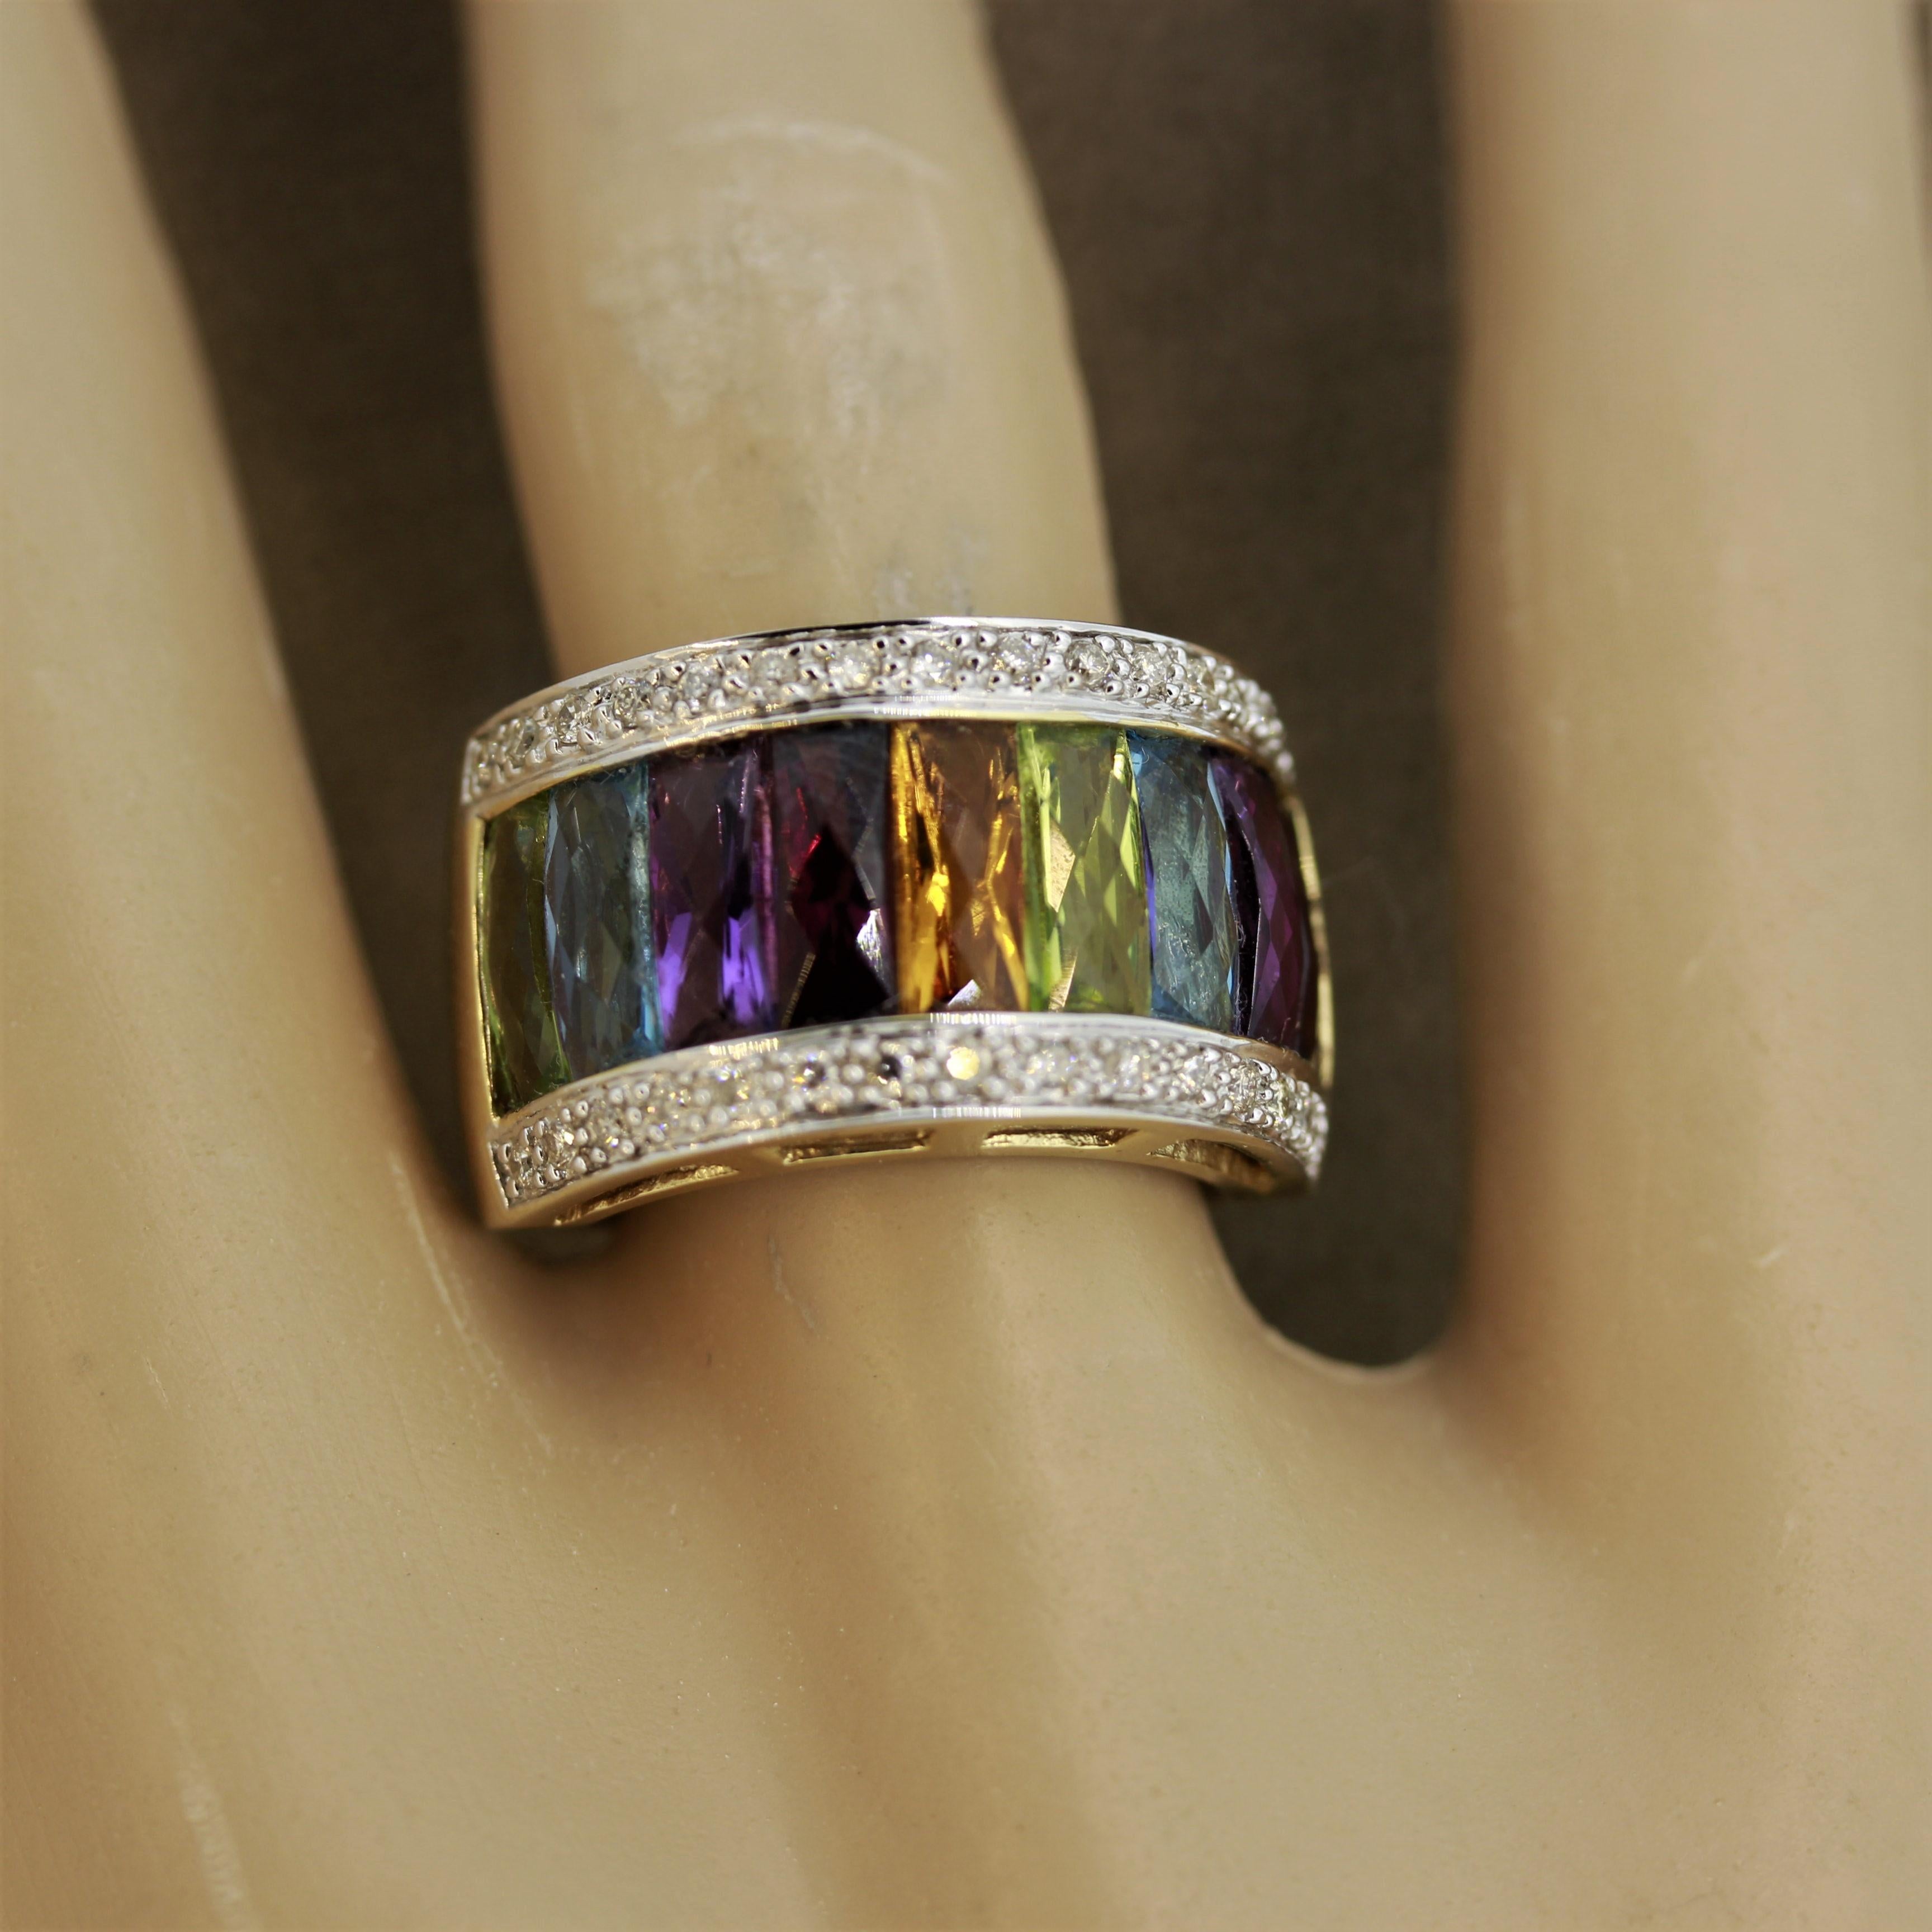 Mixed Cut Multi-Color Gemstone Diamond Gold Ring Band